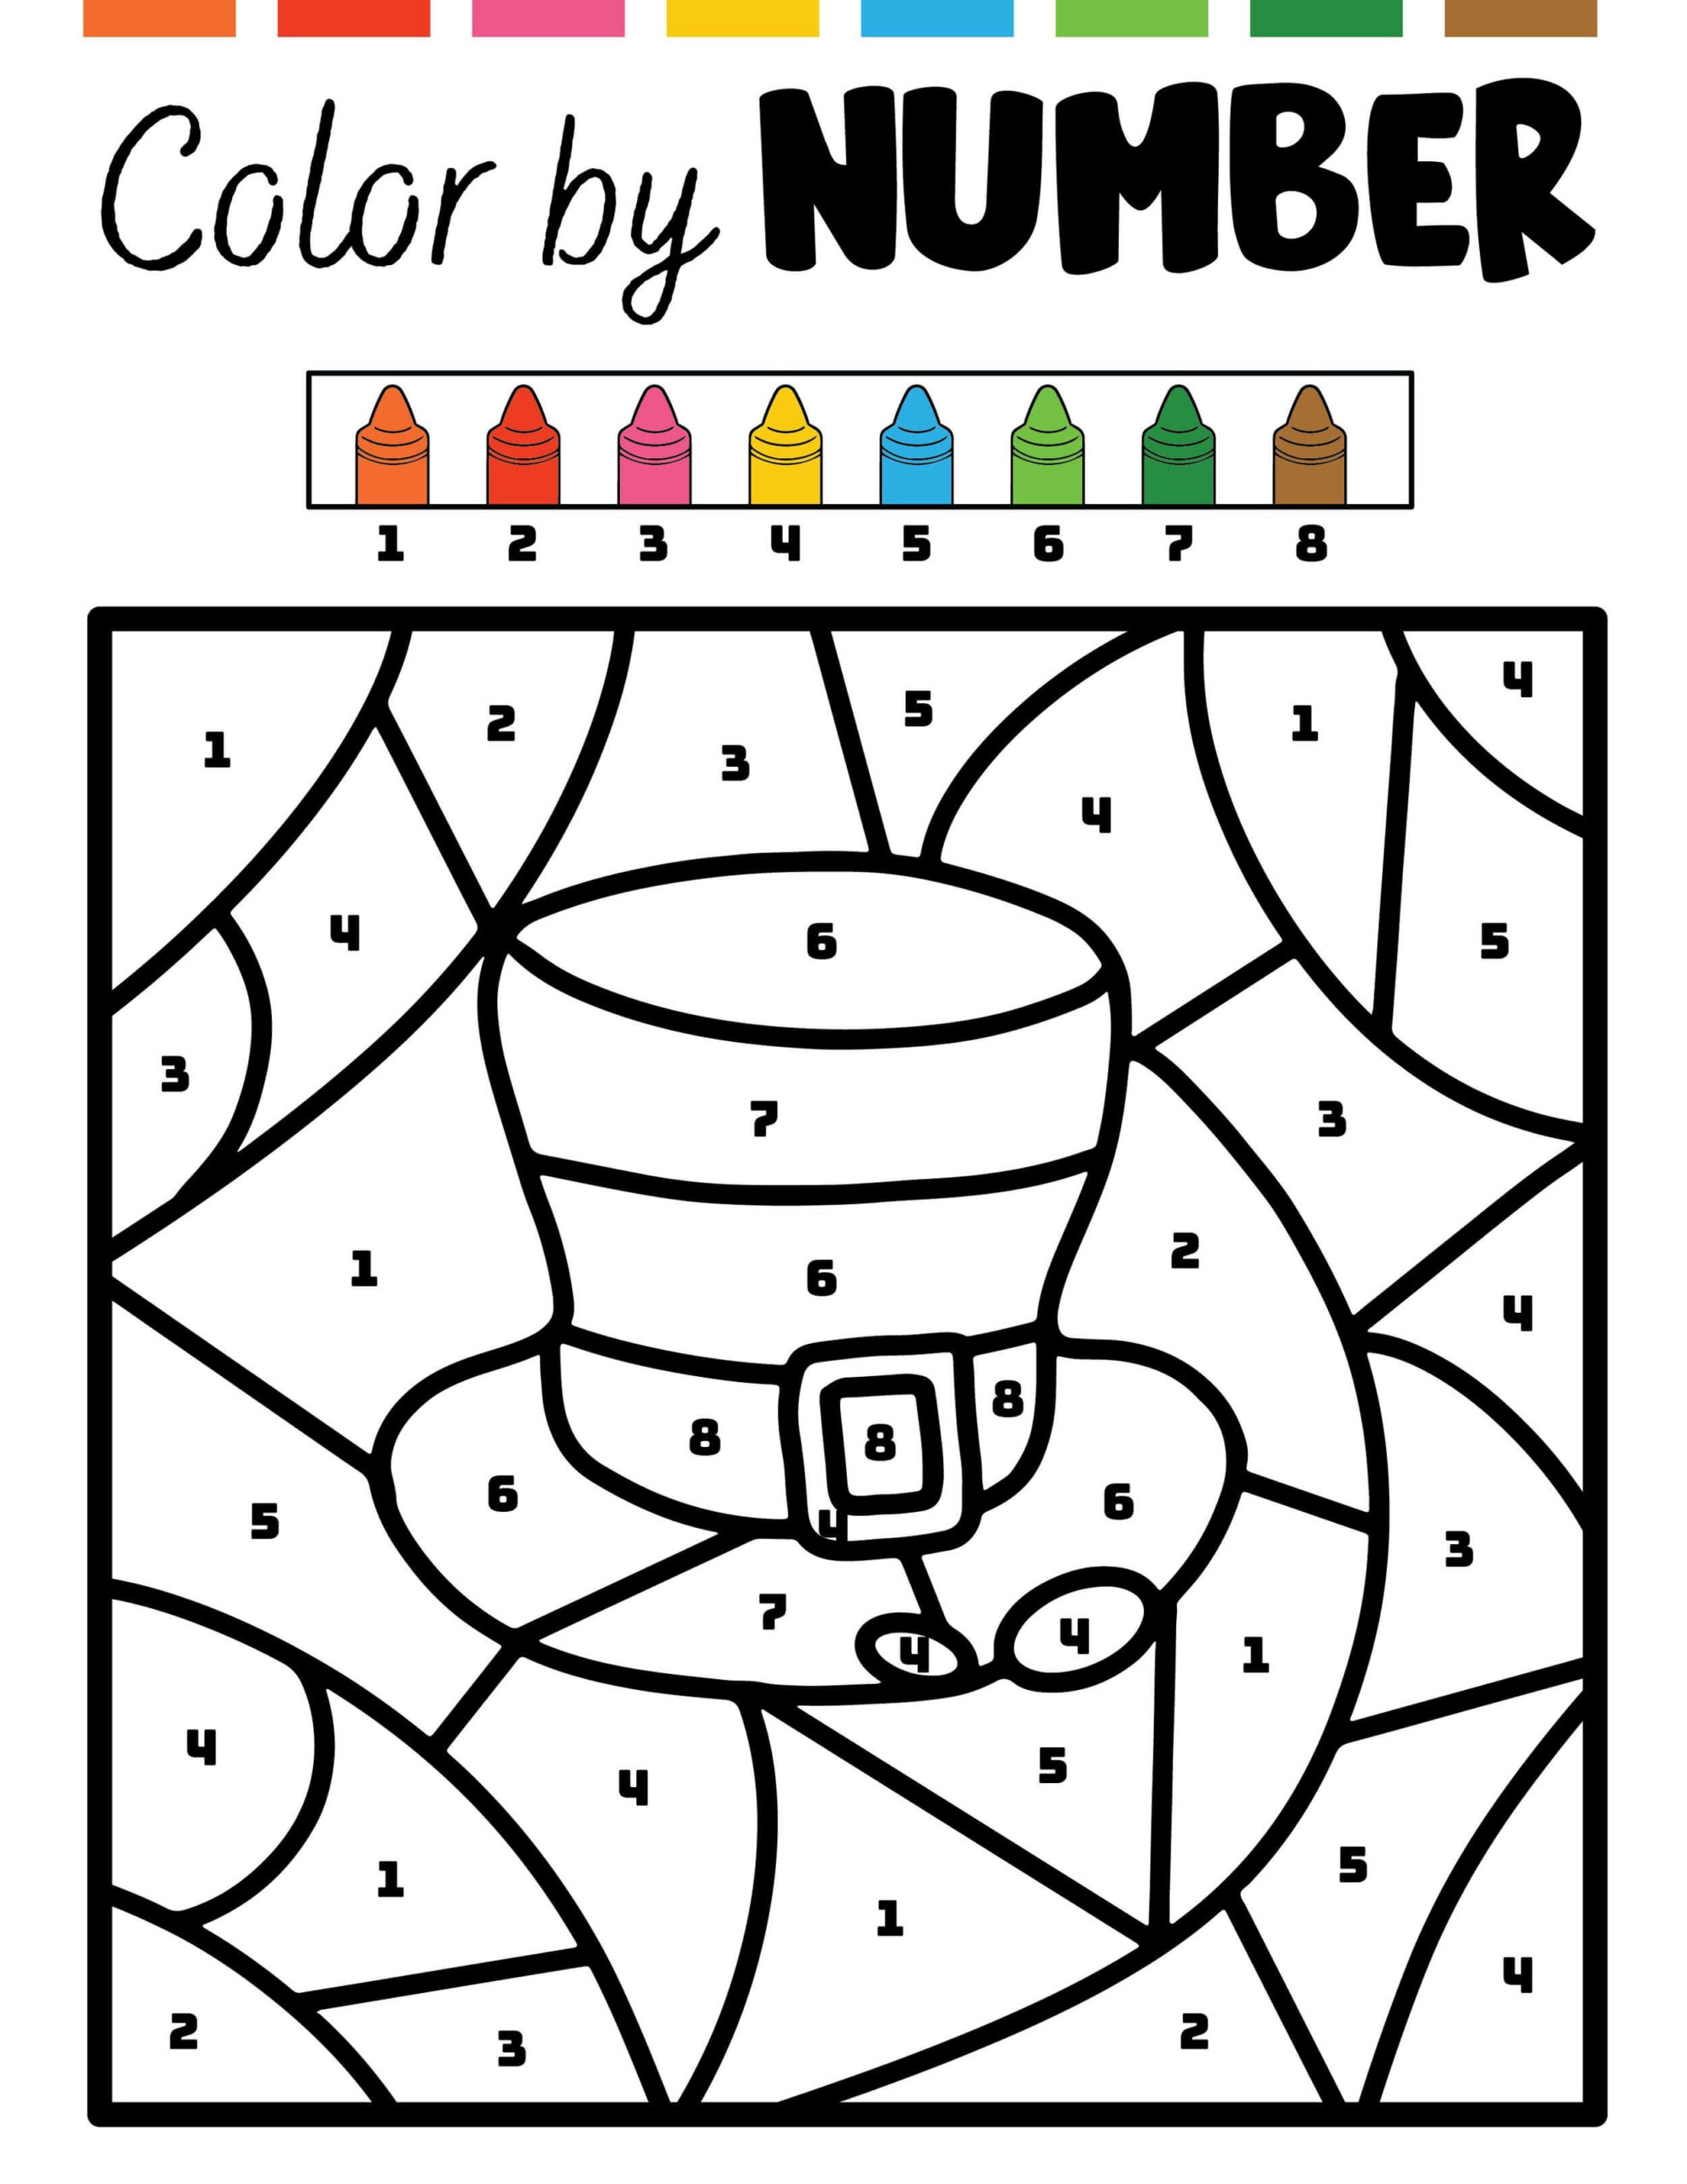 Great St. Patrick's Day Color by Number - Download, Print Now!